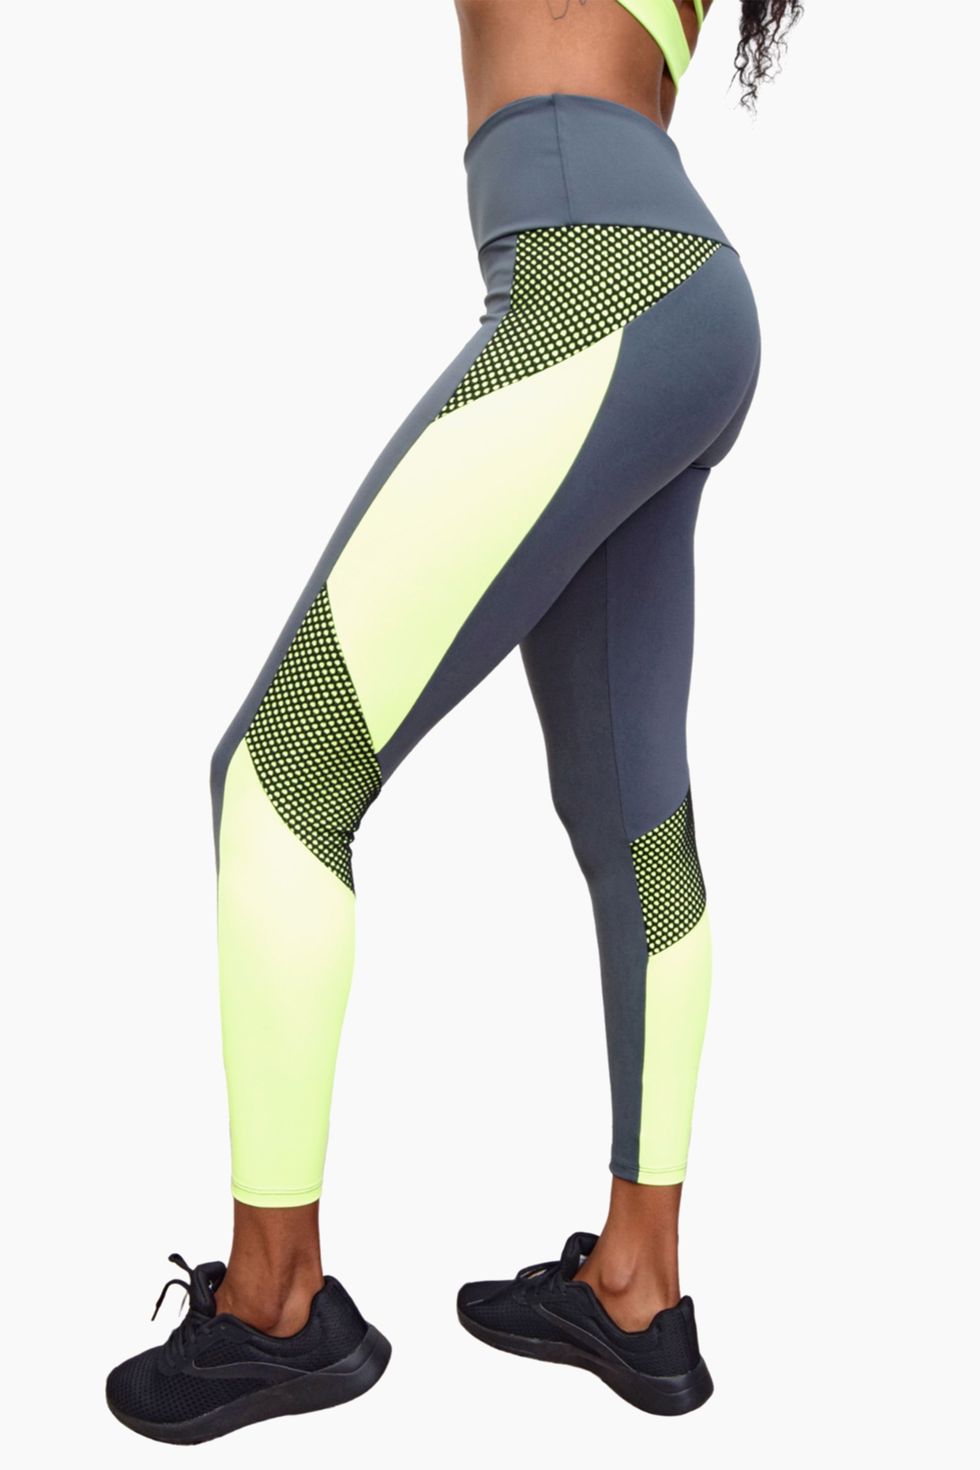 Girls Yoga Pants in leviathan's Roots Design 